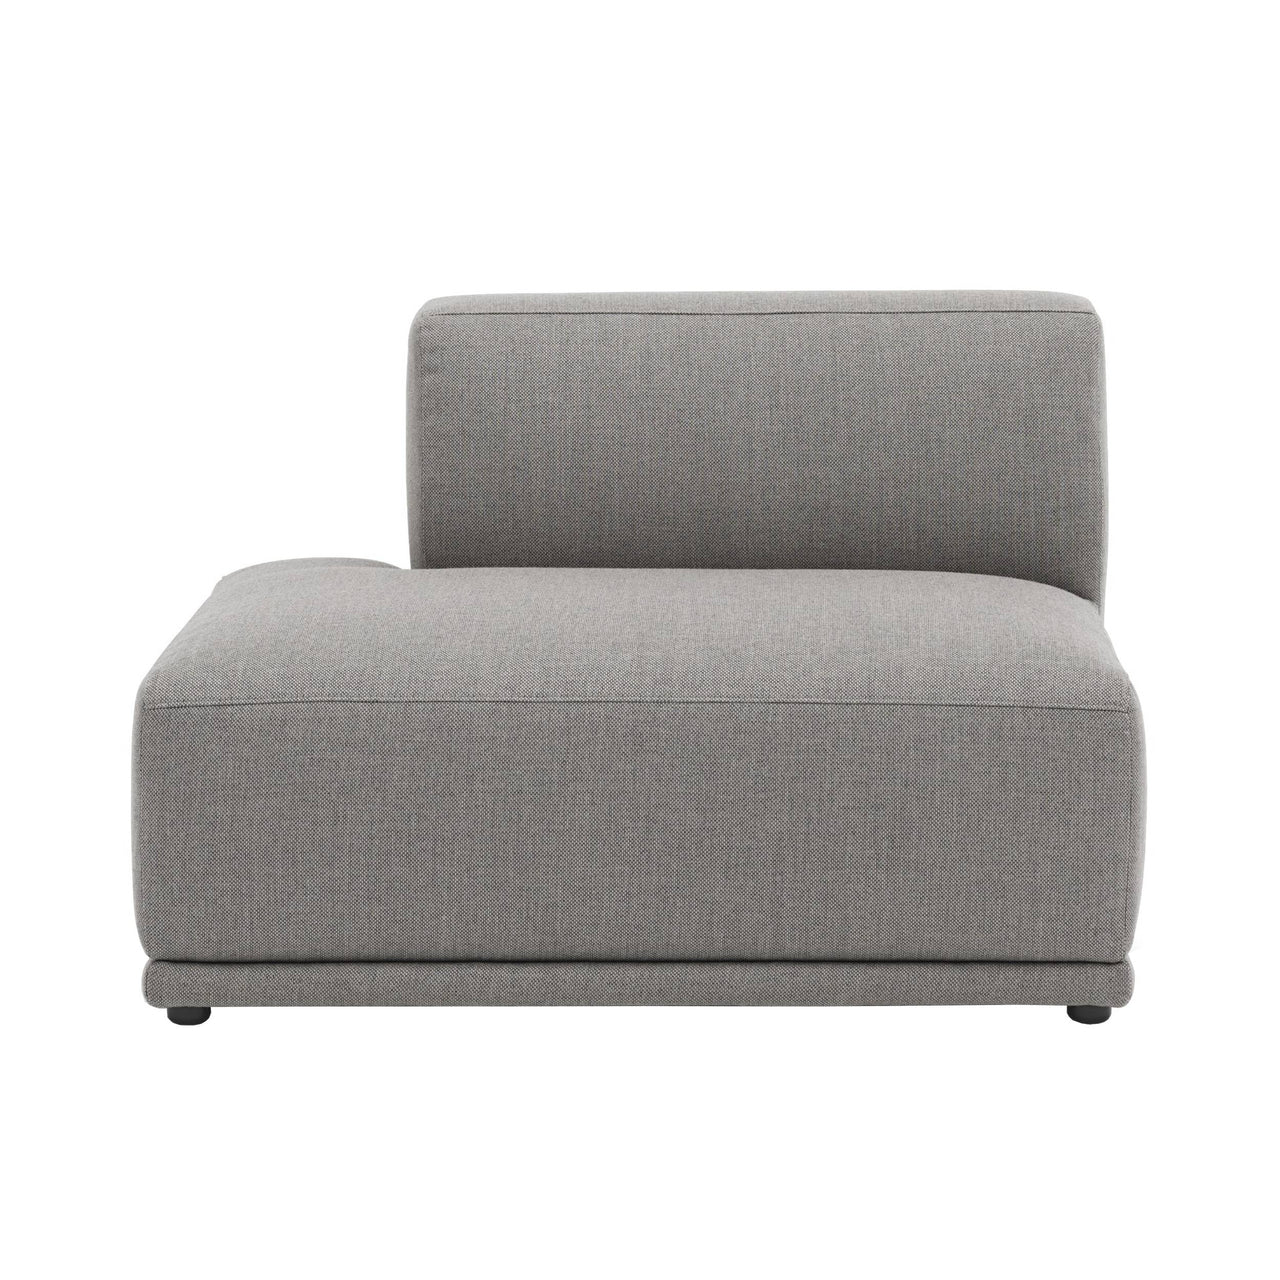 Connect Soft Sofa Modules: Left Open-Ended C 